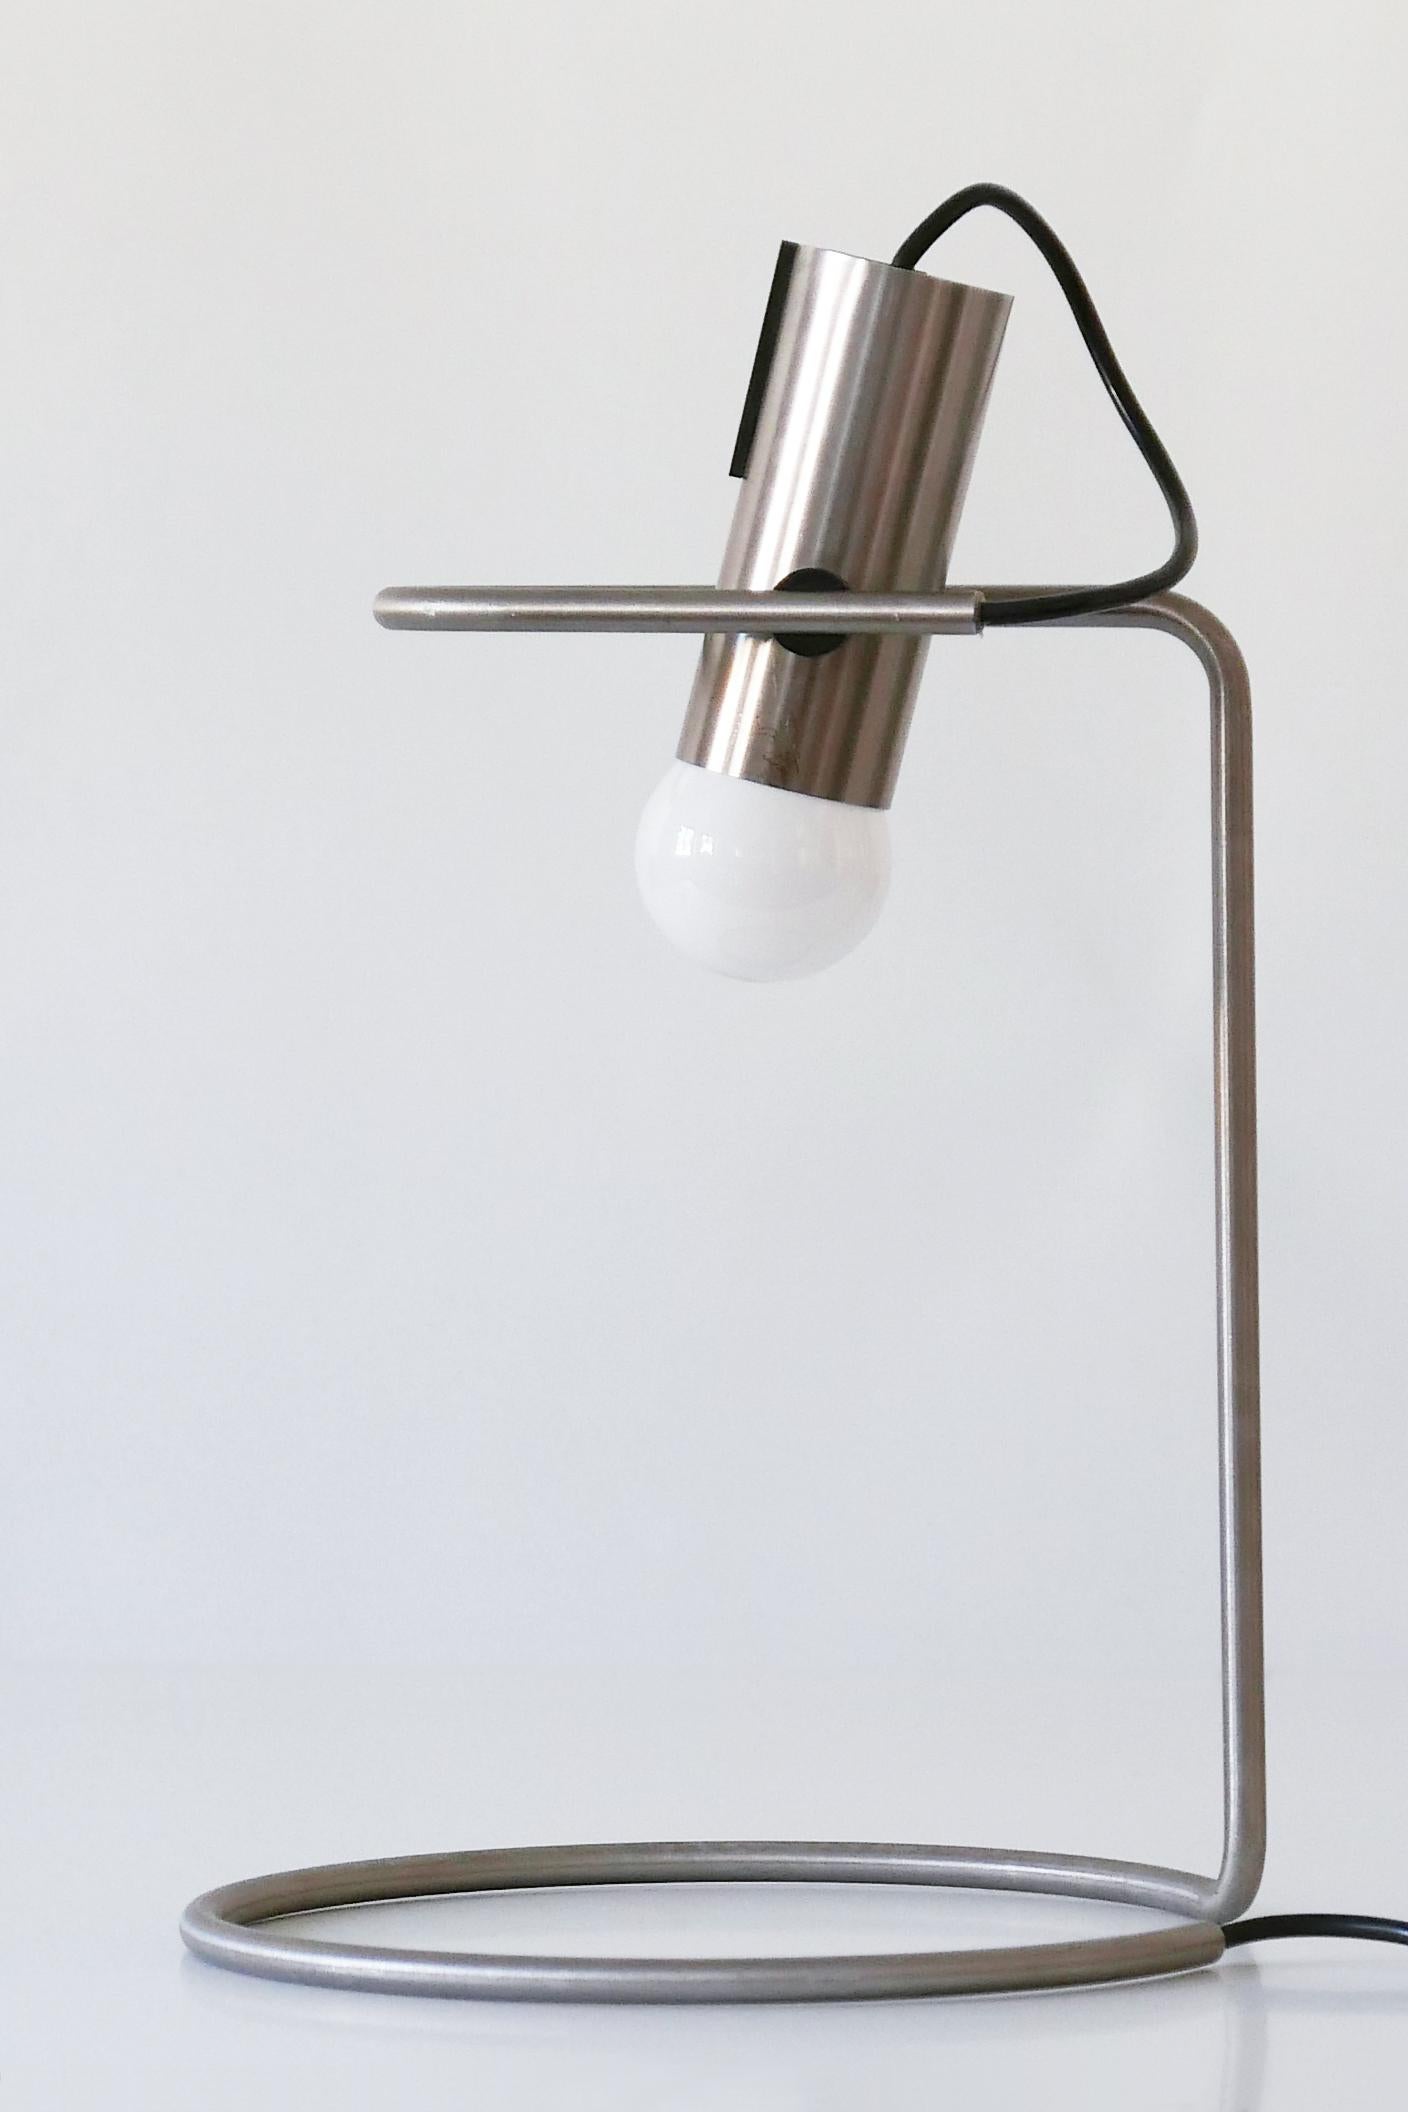 Exceptional Minimalistic Mid-Century Modern Table Lamp or Desk Light, 1960s In Good Condition For Sale In Munich, DE